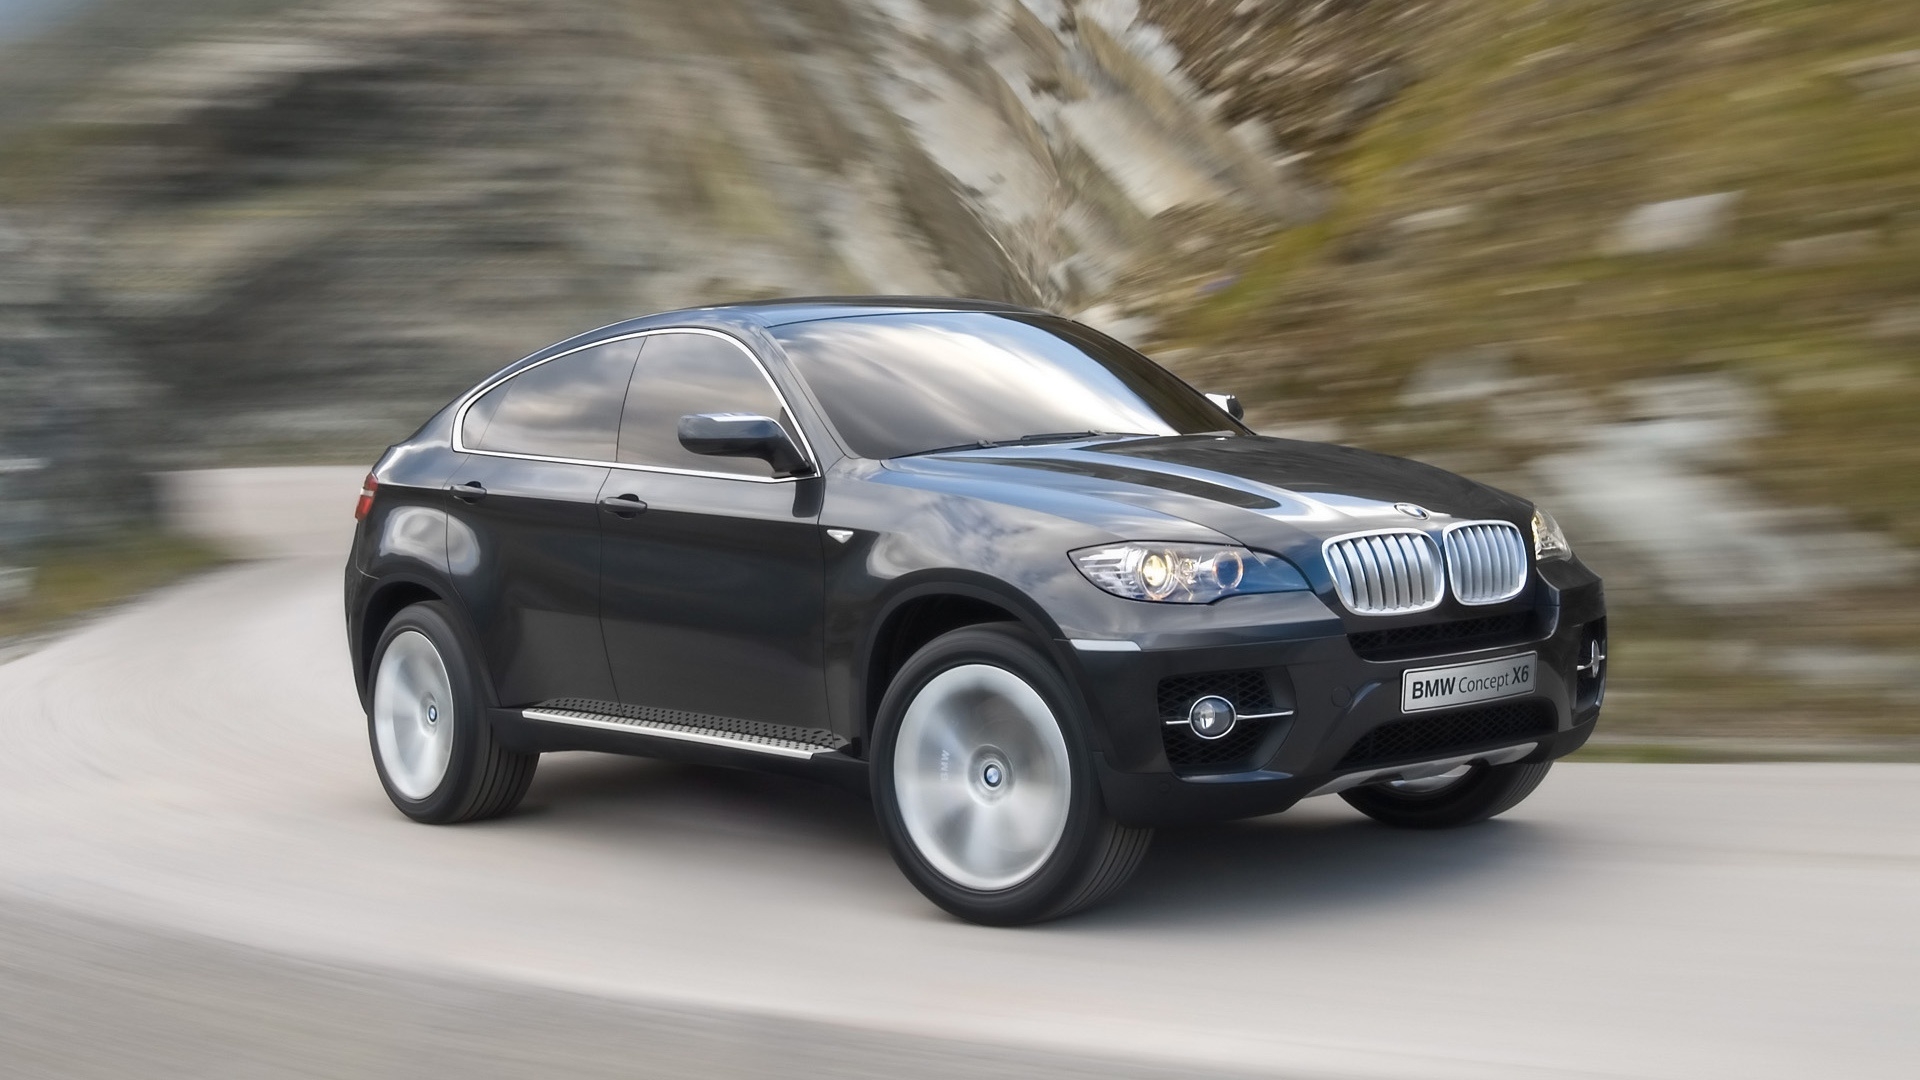 BMW Concept X6 Speed 2007 for 1920 x 1080 HDTV 1080p resolution